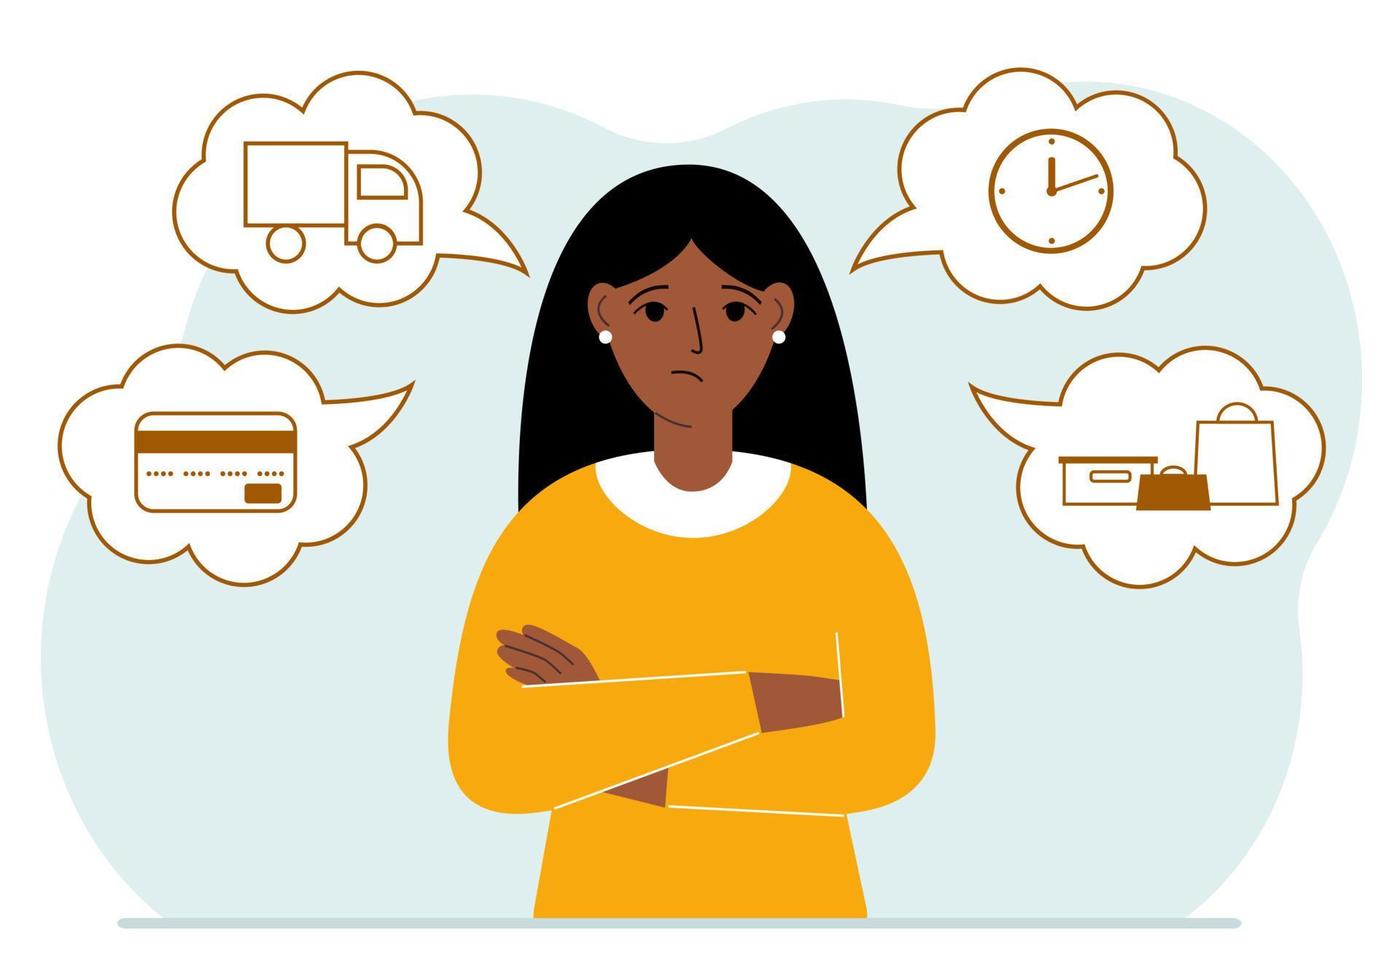 Ordering and delivery process concepts. Sad woman and steps of a delivery order. Payment, delivery car, waiting hours and goods and purchases. Vector flat illustration